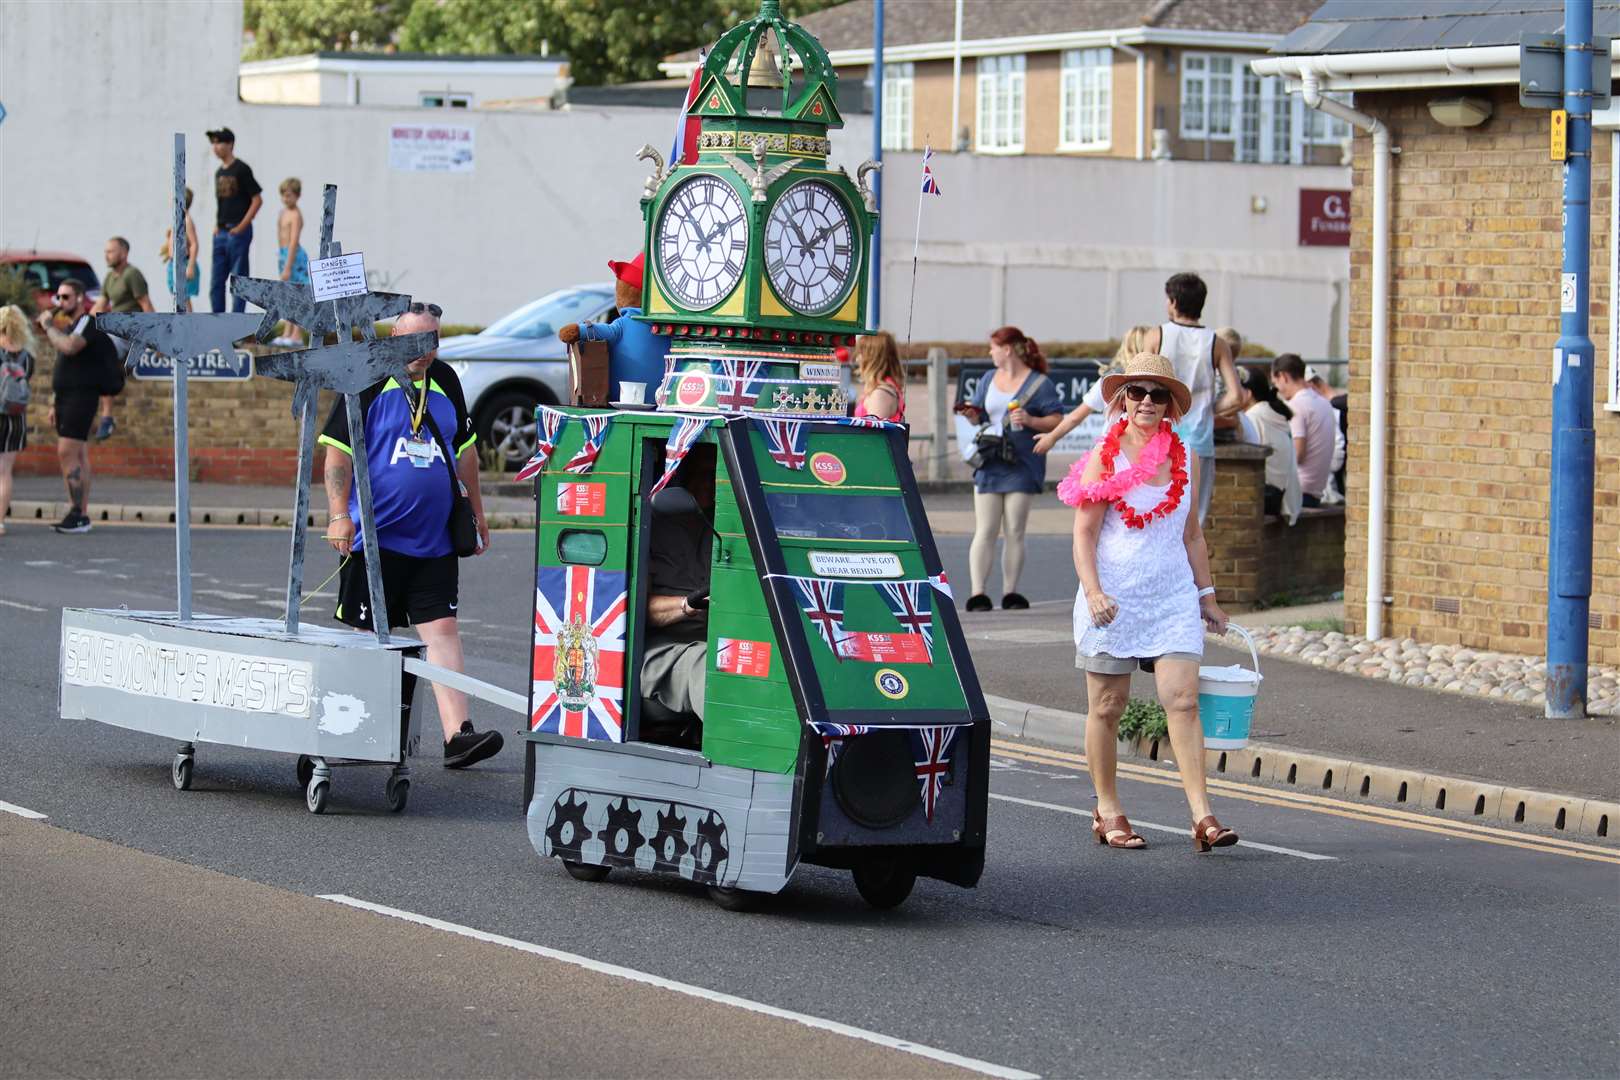 Tim Bell's mobility scooter replica clock tower in Sheerness carnival. Picture: John Nurden (58929691)